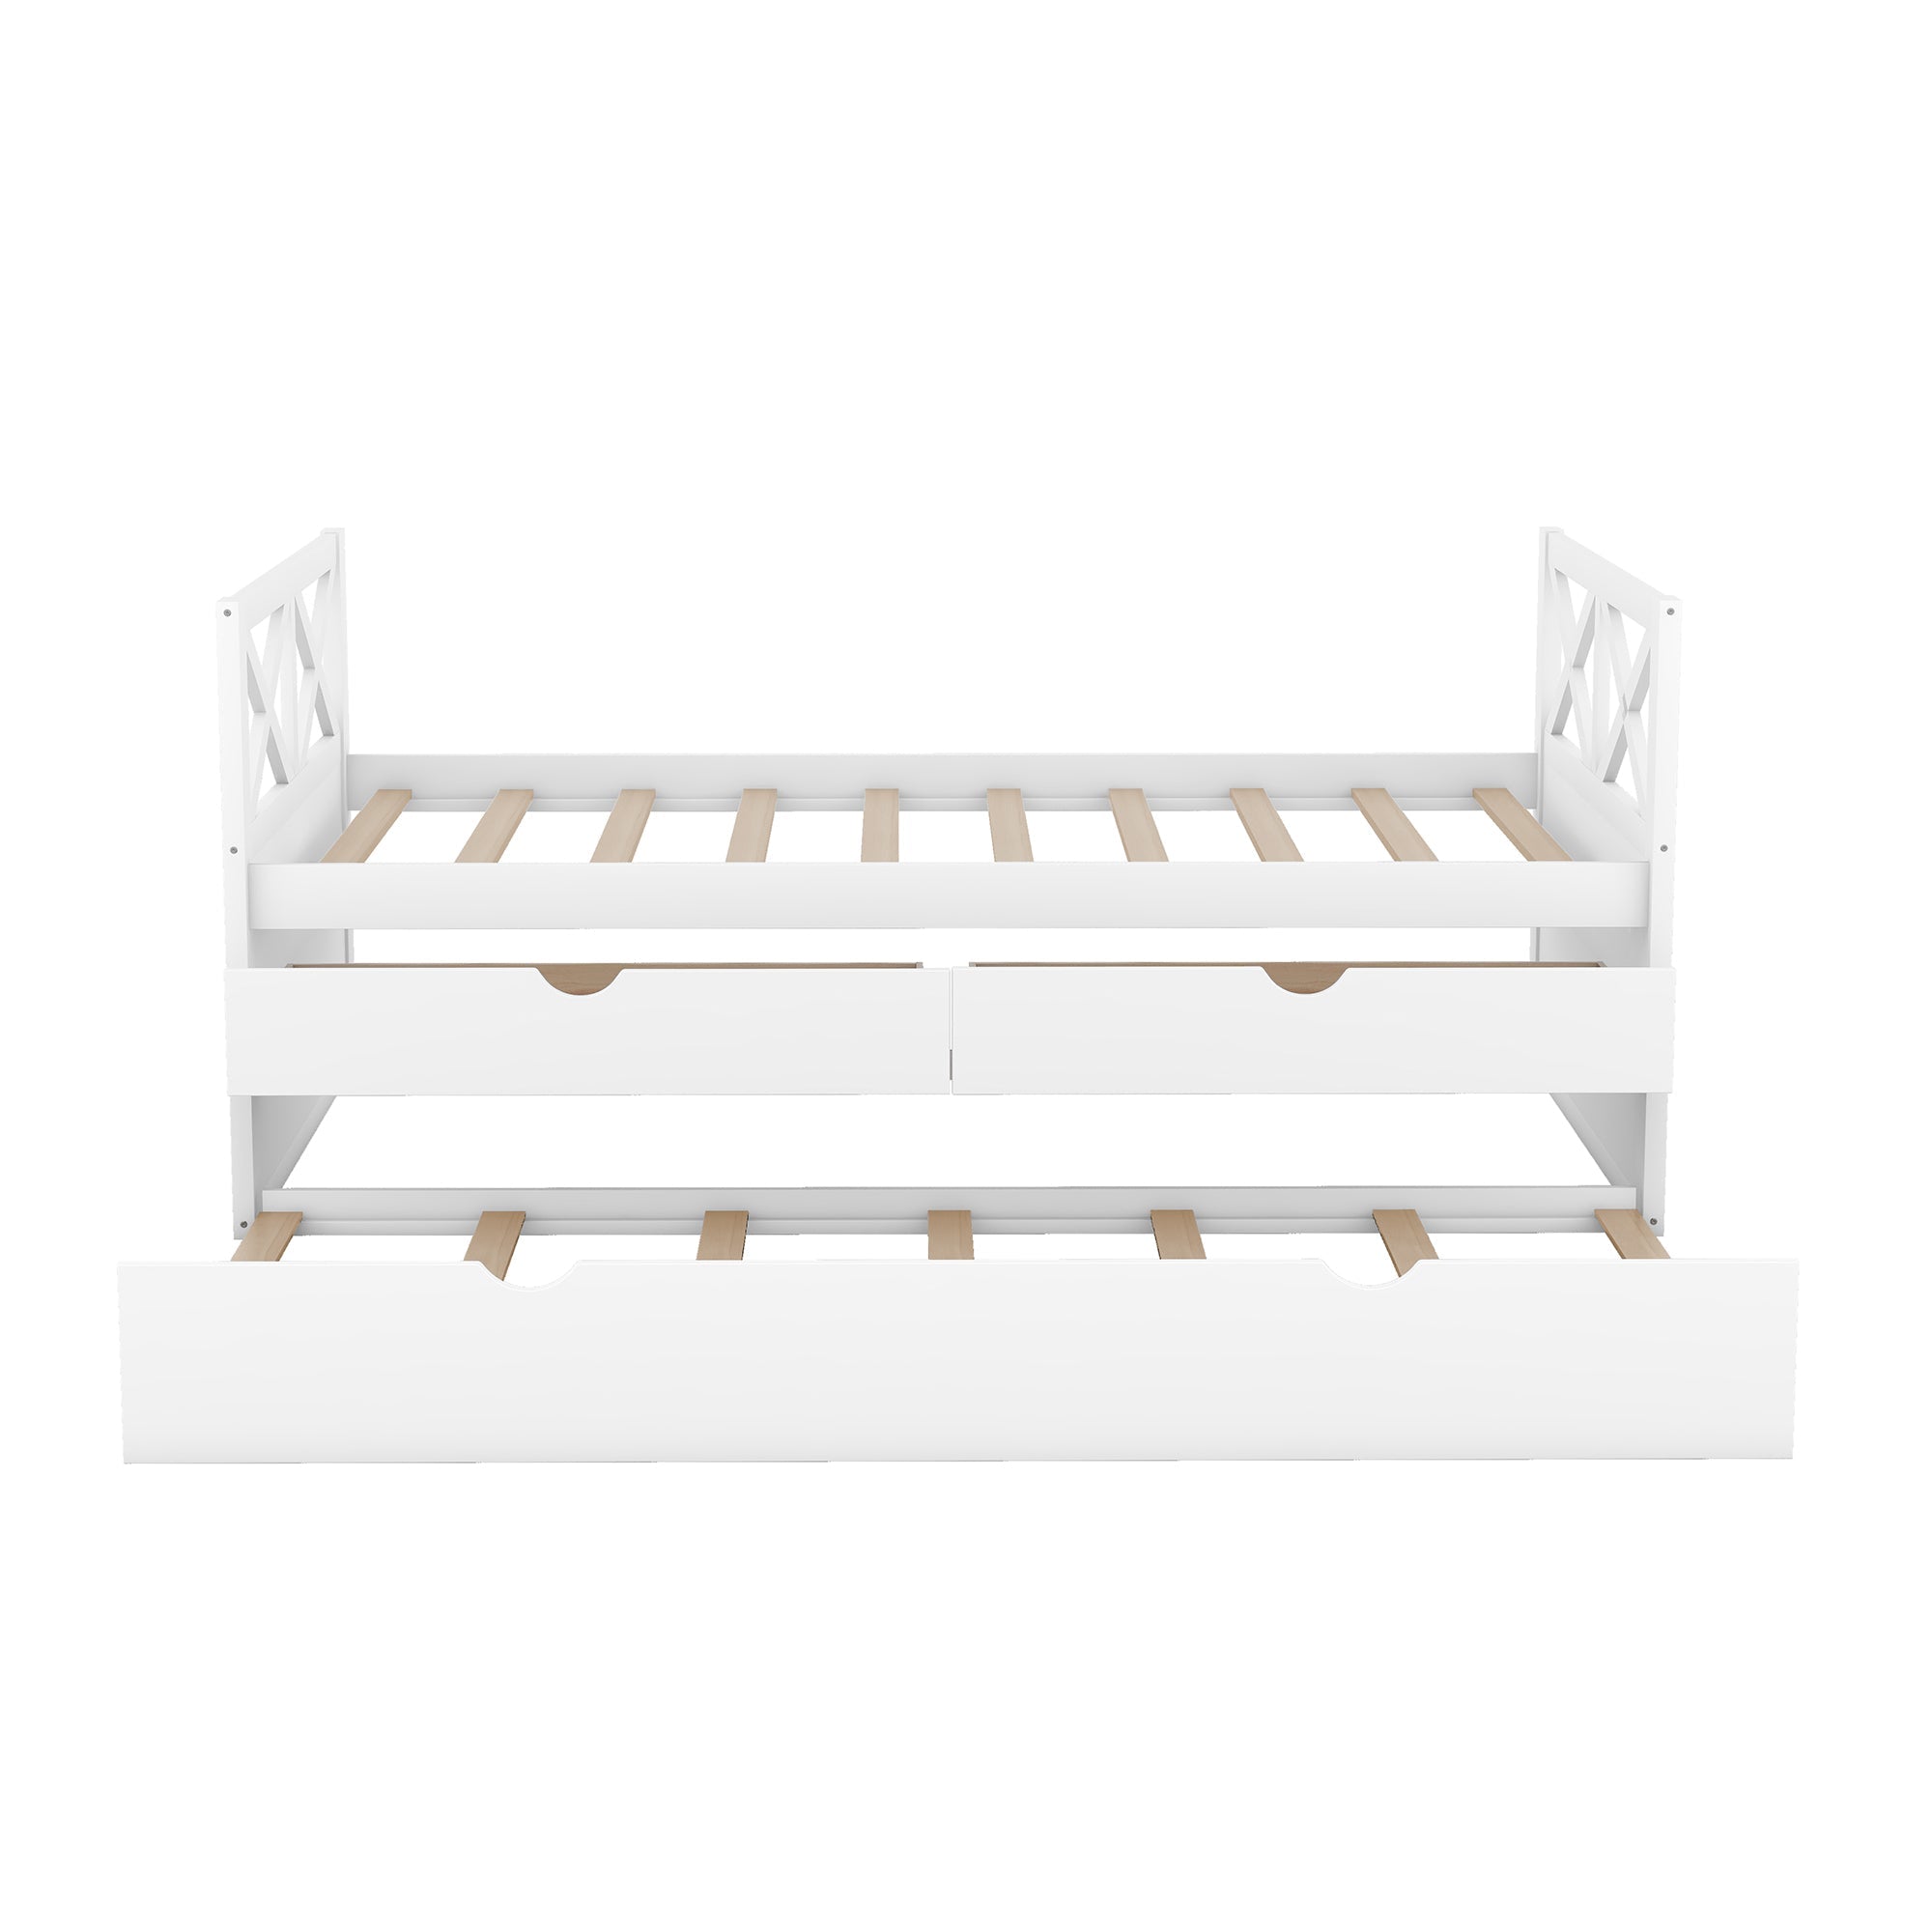 Multi-Functional Daybed with Drawers and Trundle | White Finish | Space-Saving Solution